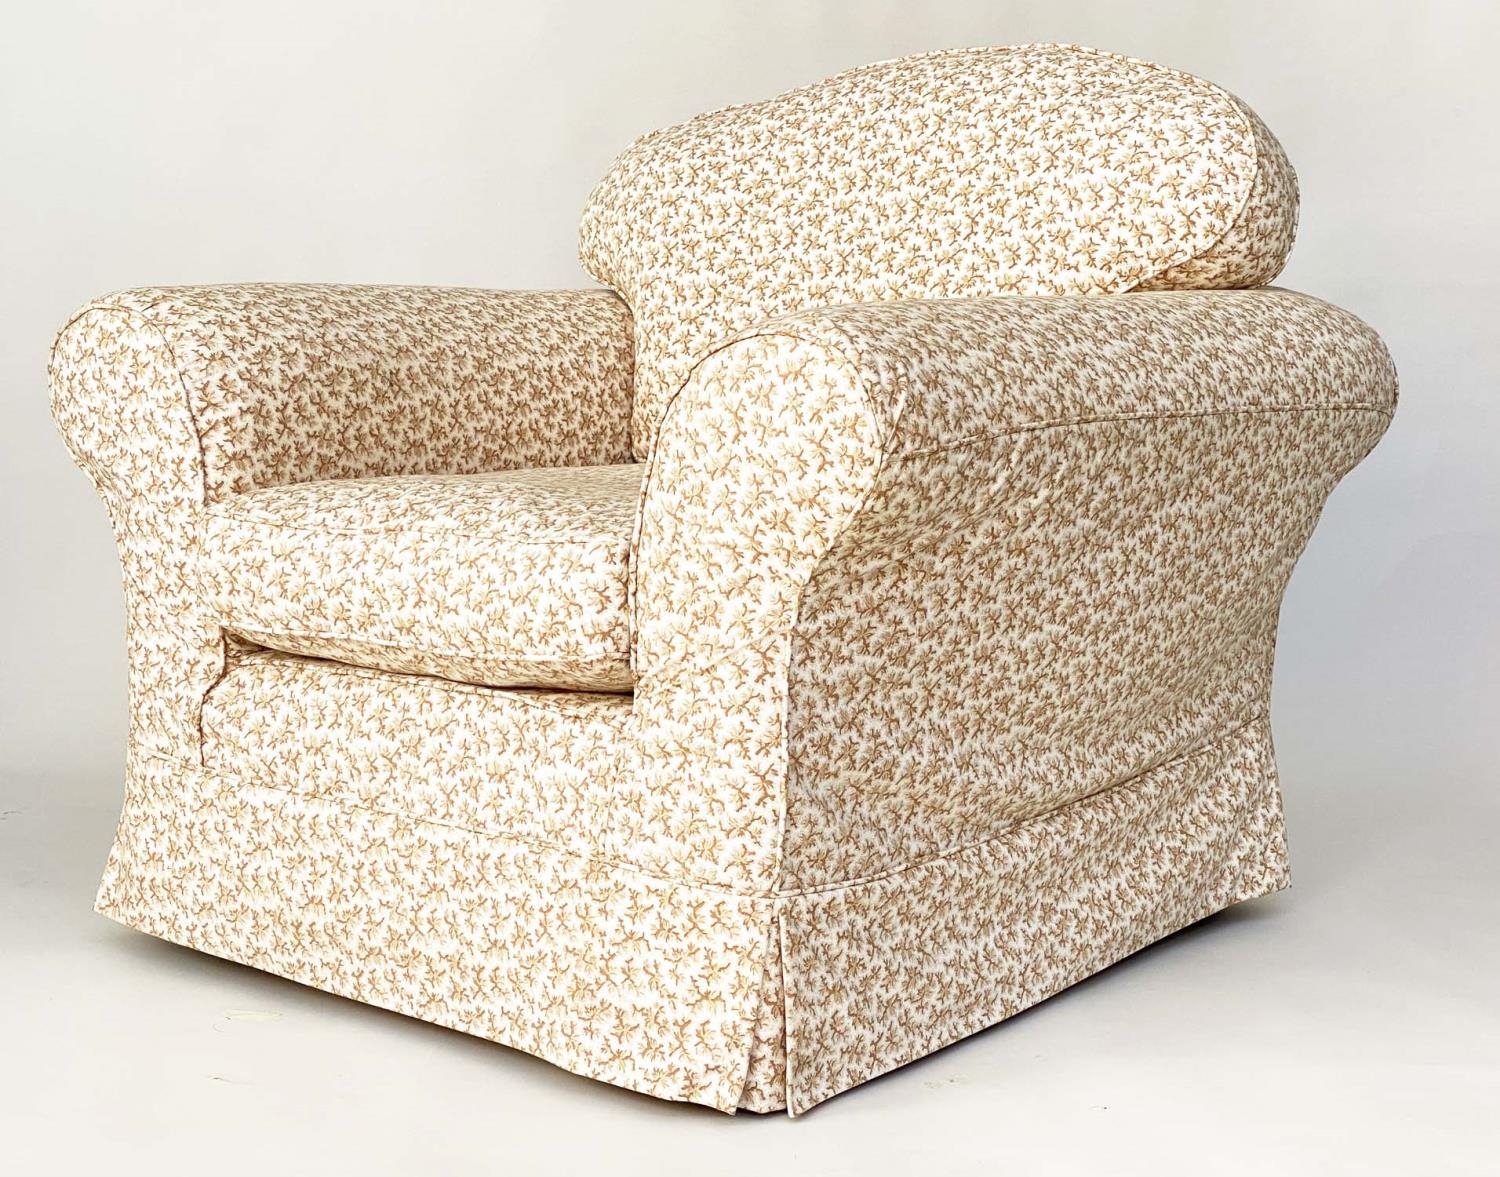 ARMCHAIRS, a pair, Country House style with Colefax seaweed print loose covers with arched back - Image 6 of 6